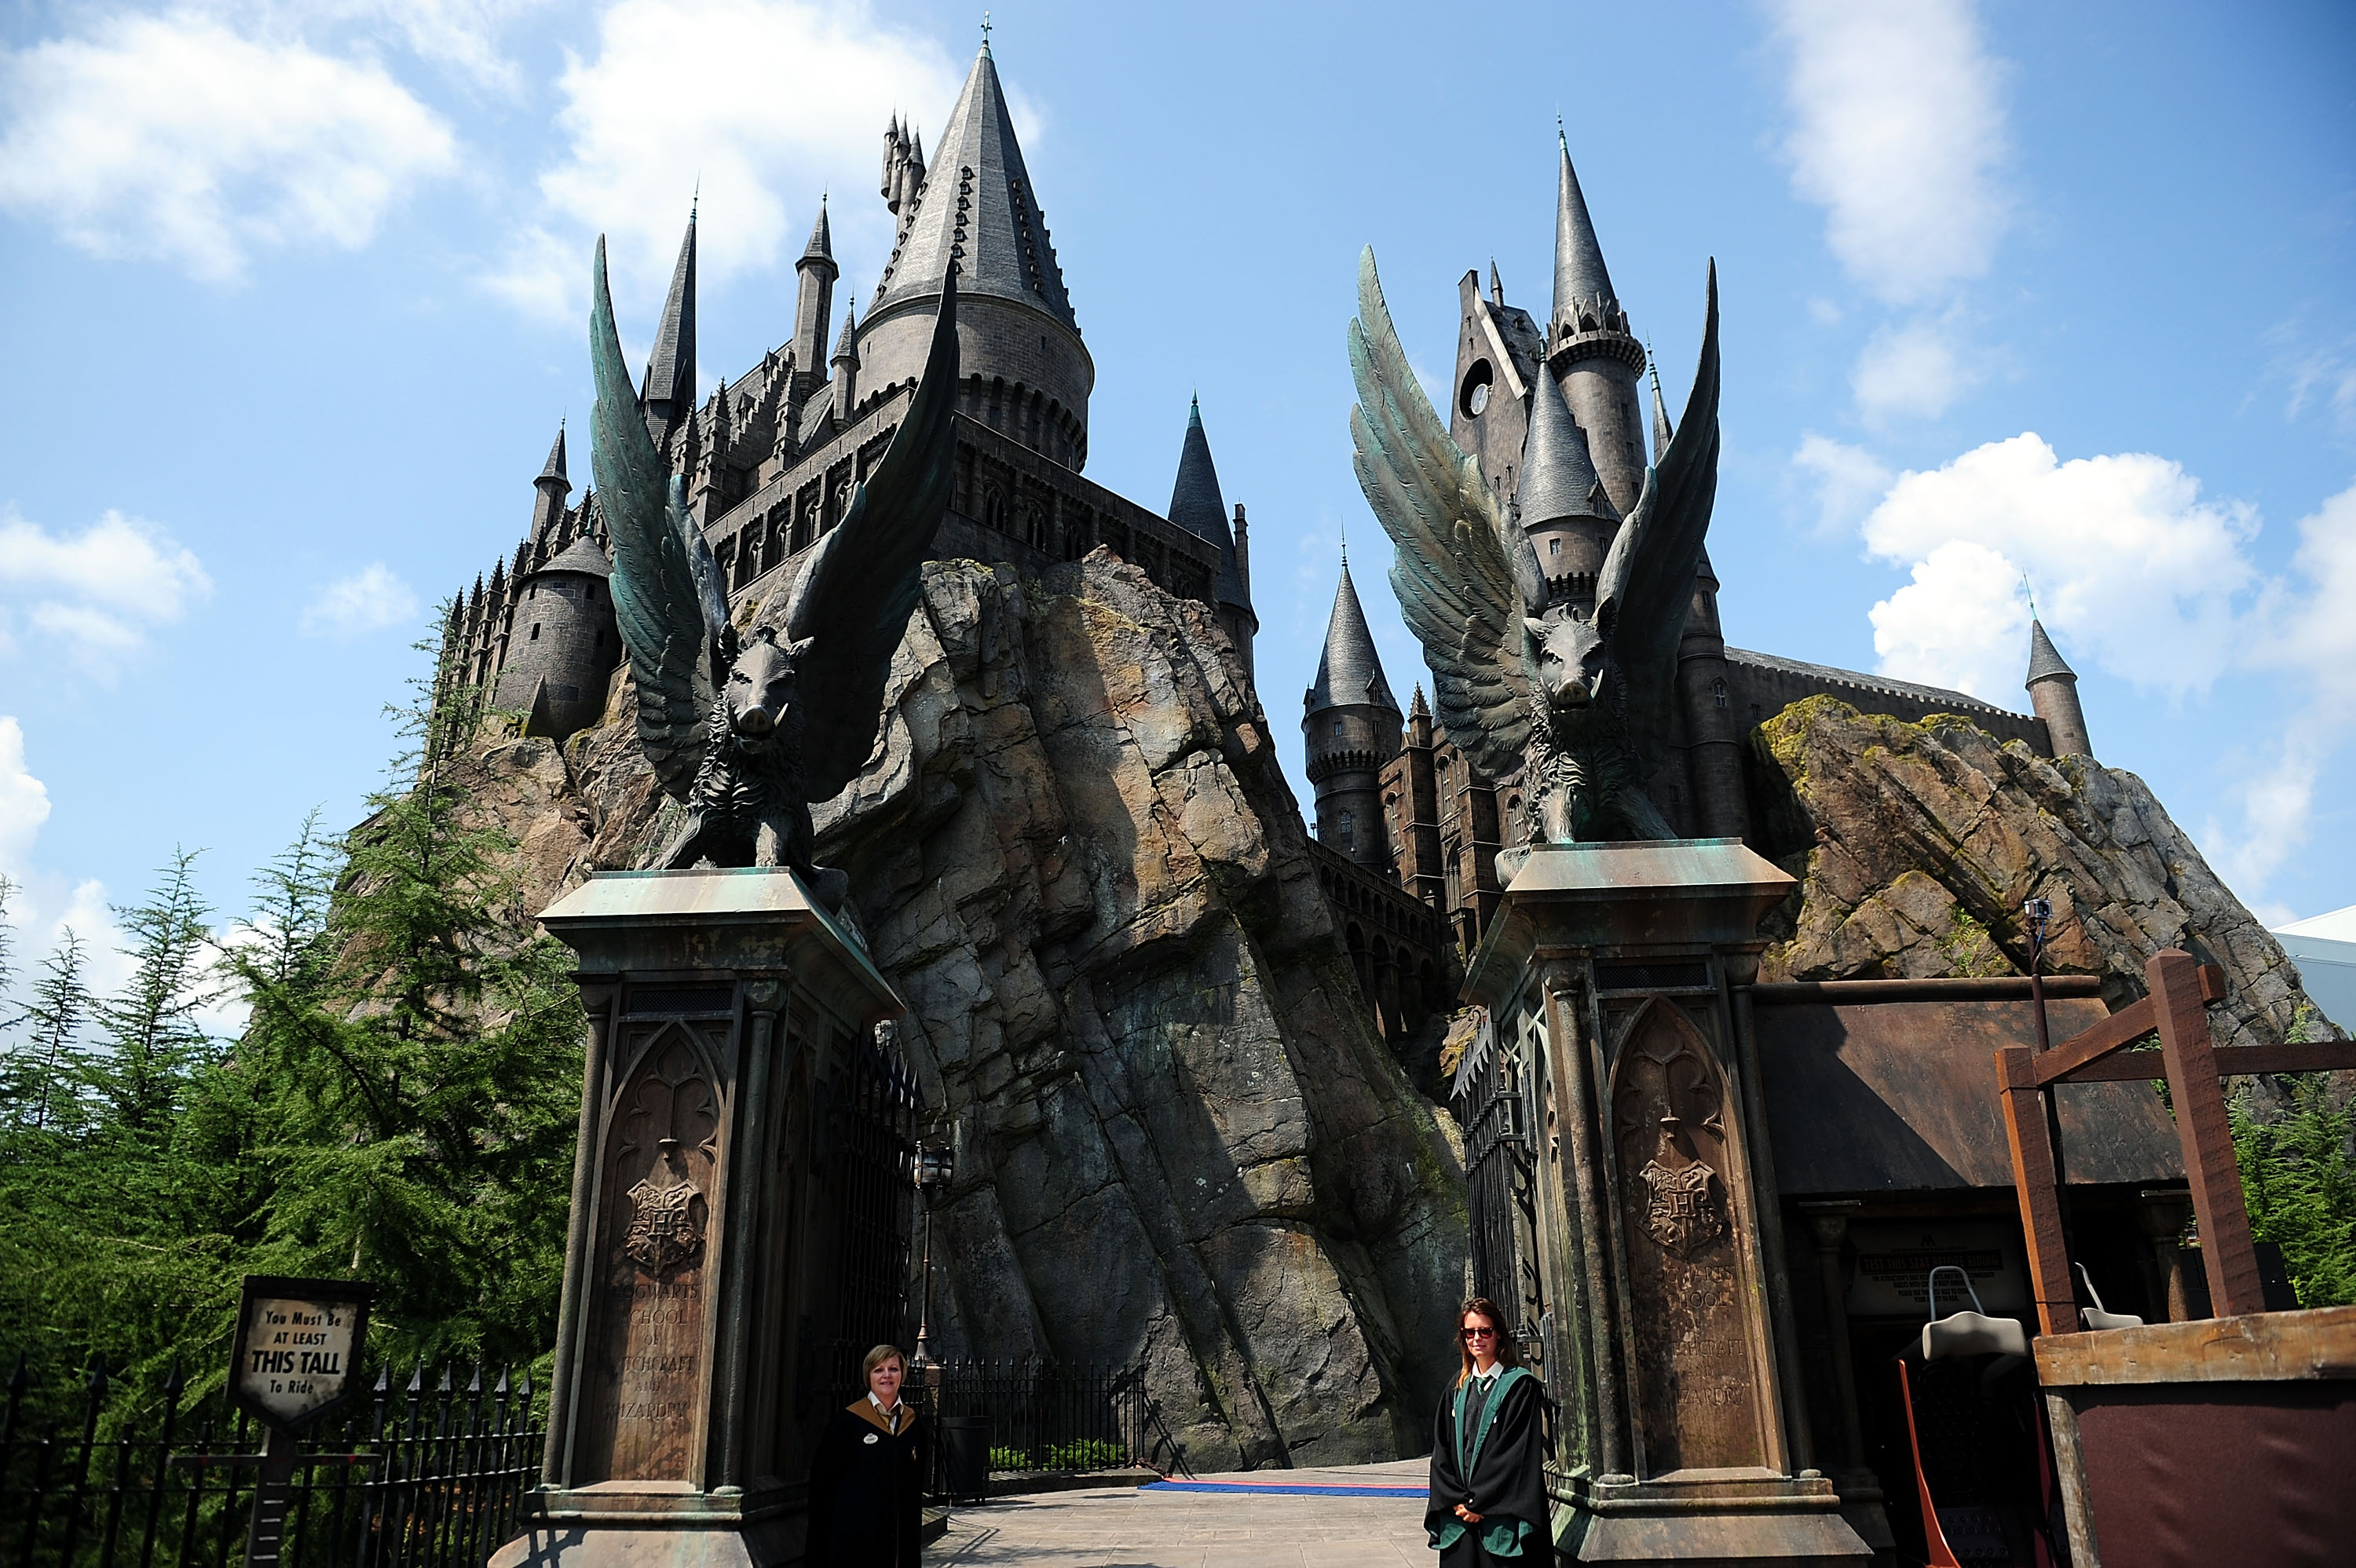 Grand Opening Of The Wizarding World of Harry Potter - Day Two